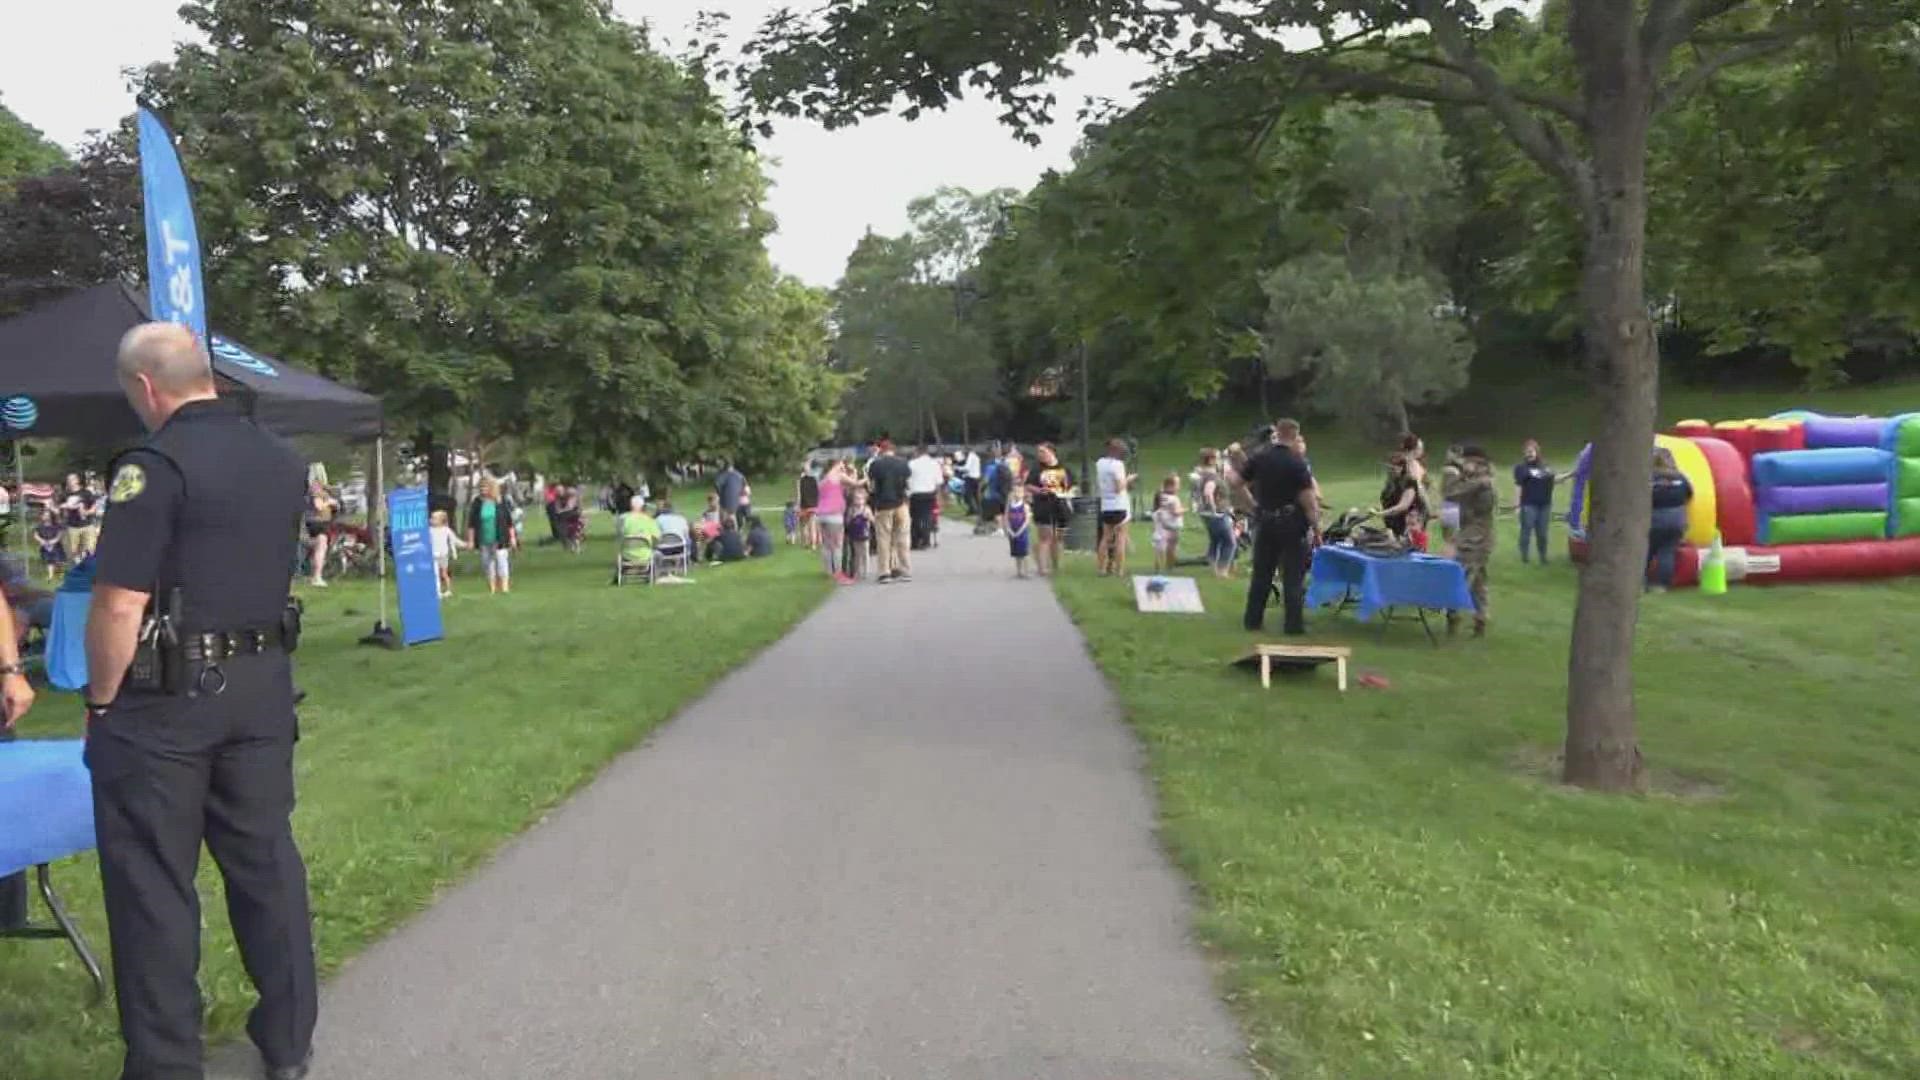 The event will happen Tuesday, August 3 from 6 p.m. to 8 p.m. at Second Street Park in Bangor.